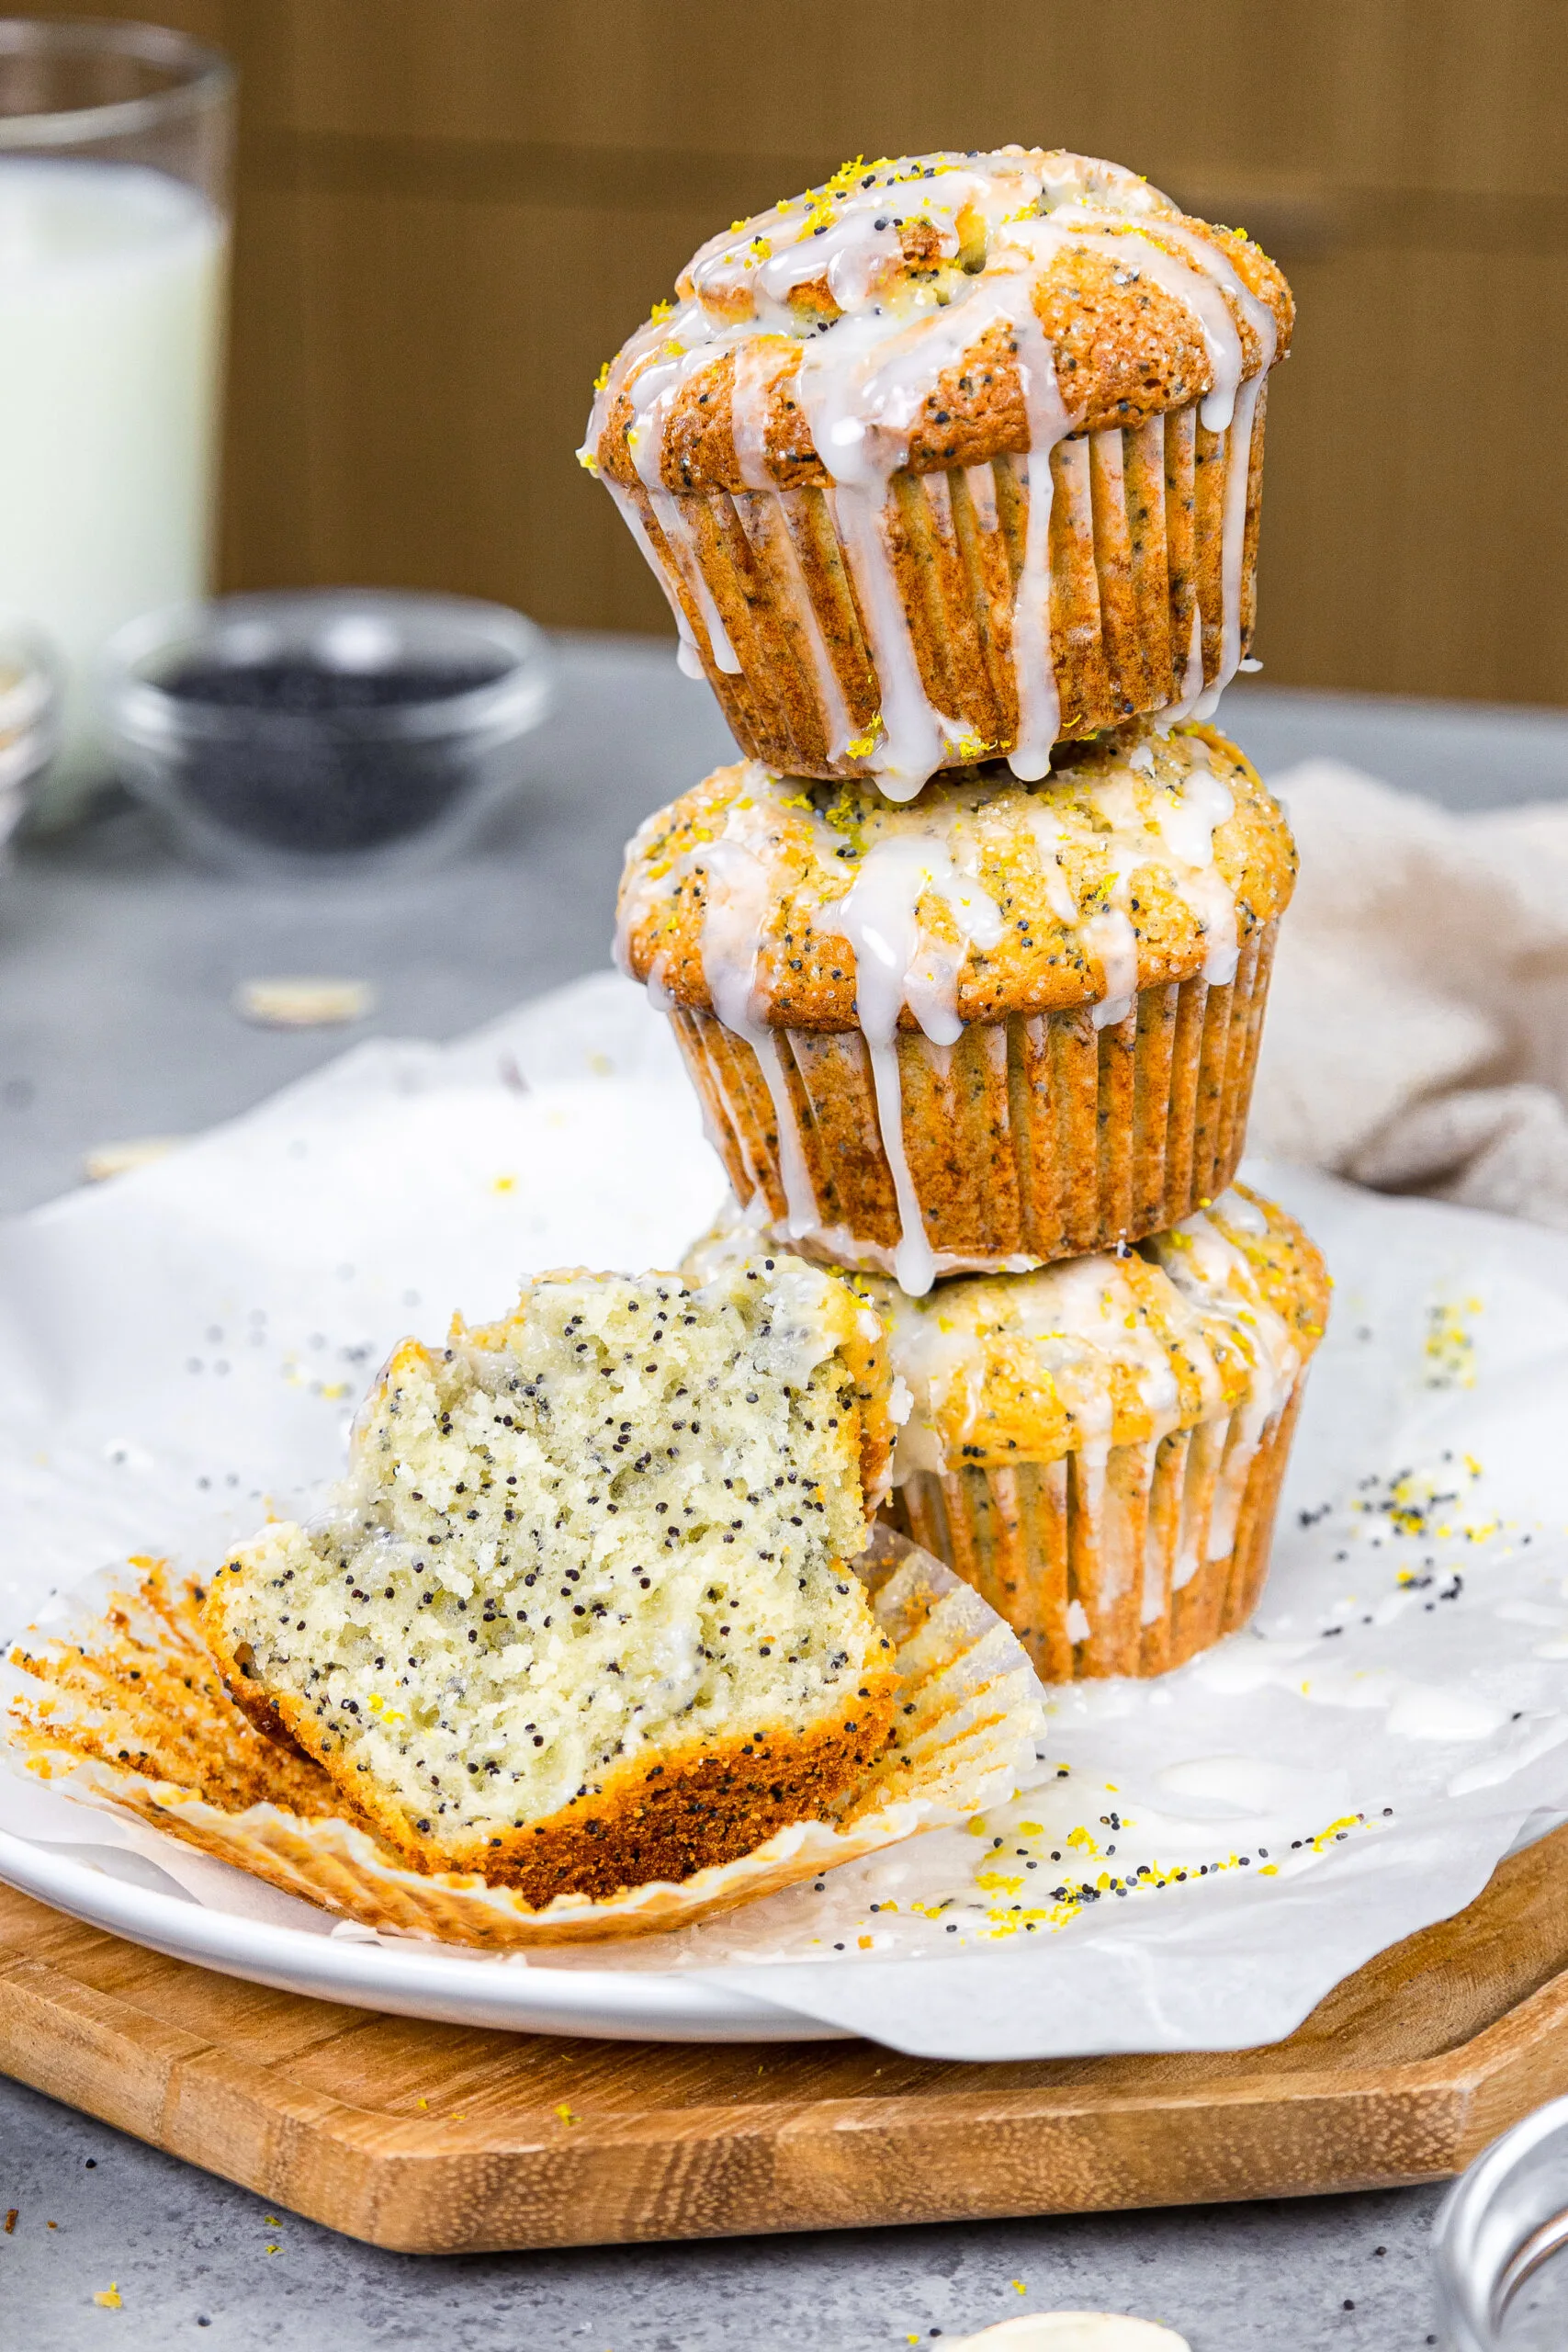 image of almond poppy seed muffins stacked with a muffin cut into to show how tender and soft it is